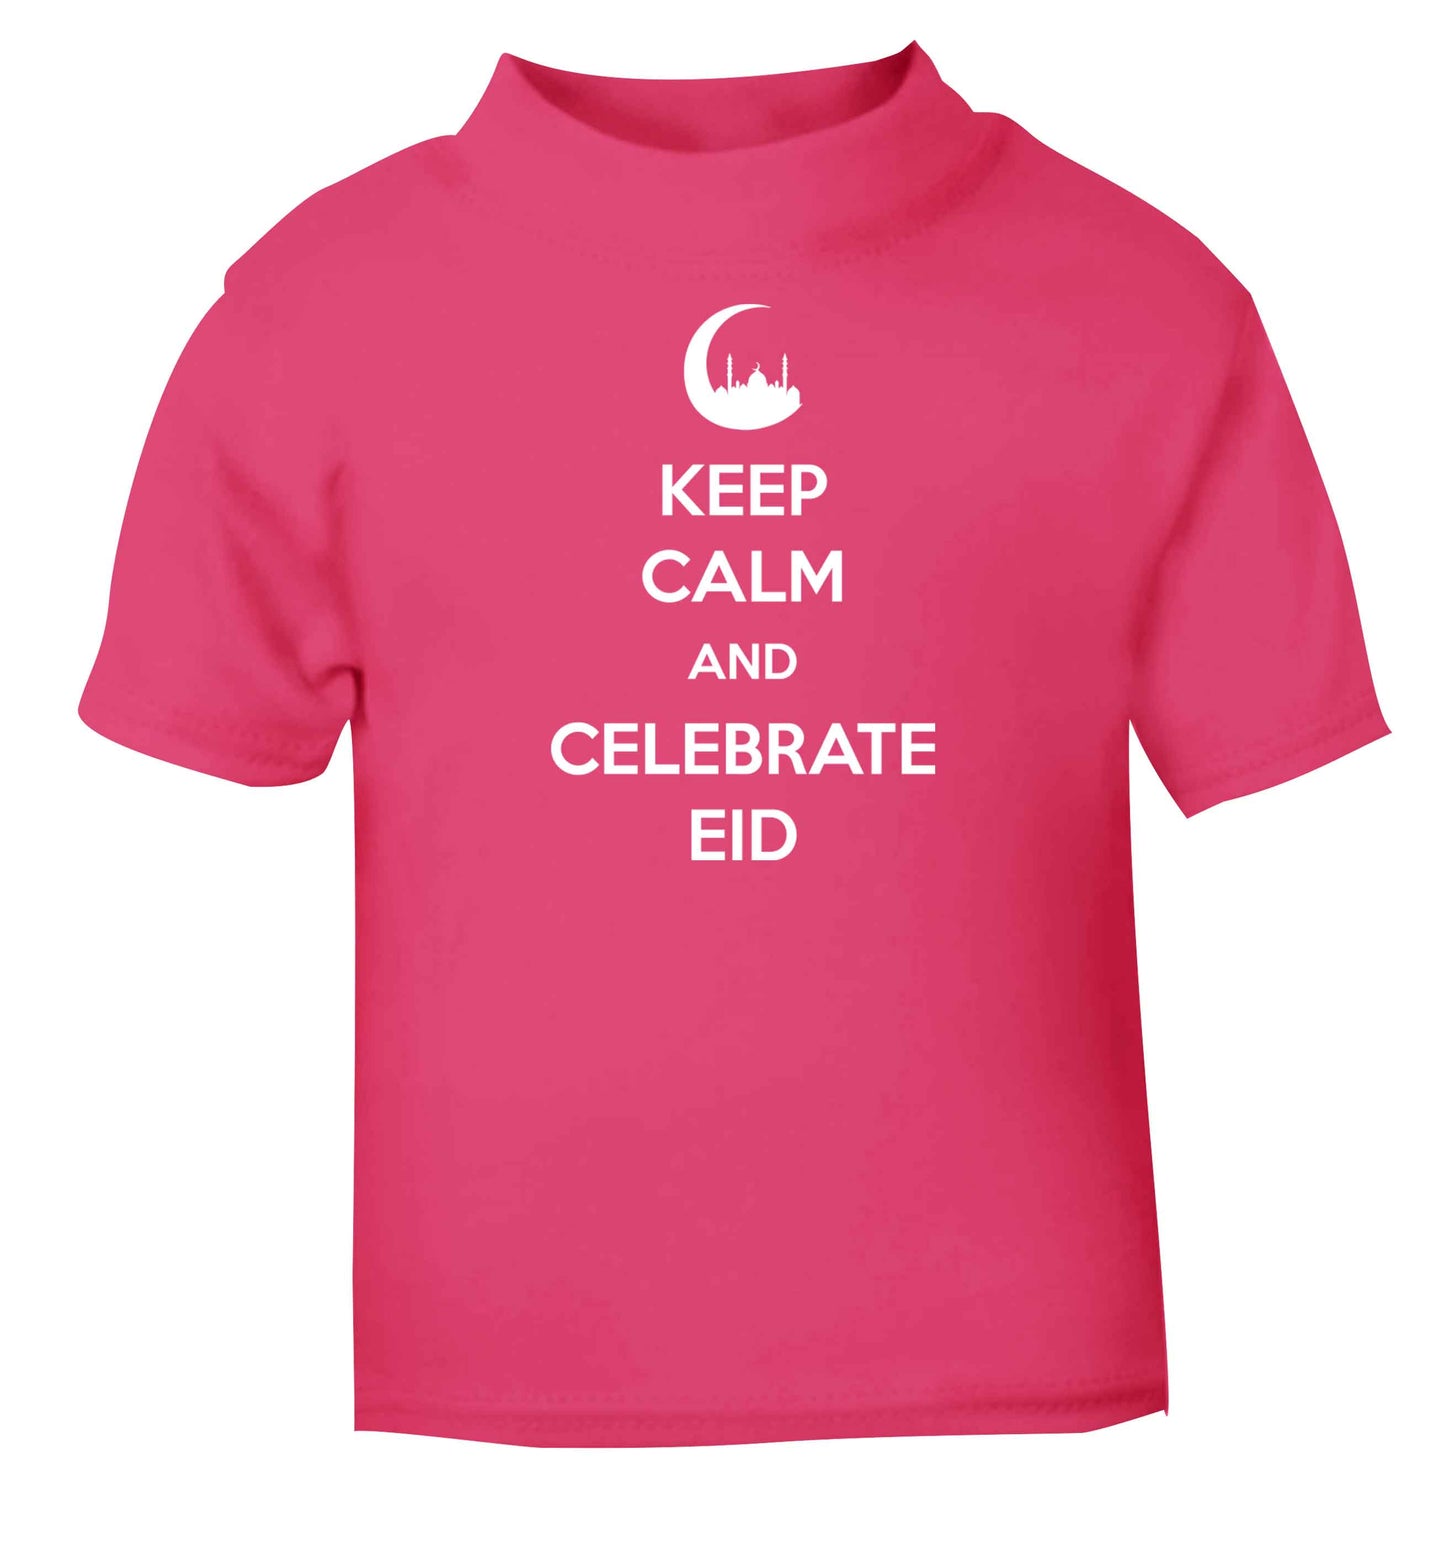 Keep calm and celebrate Eid pink baby toddler Tshirt 2 Years